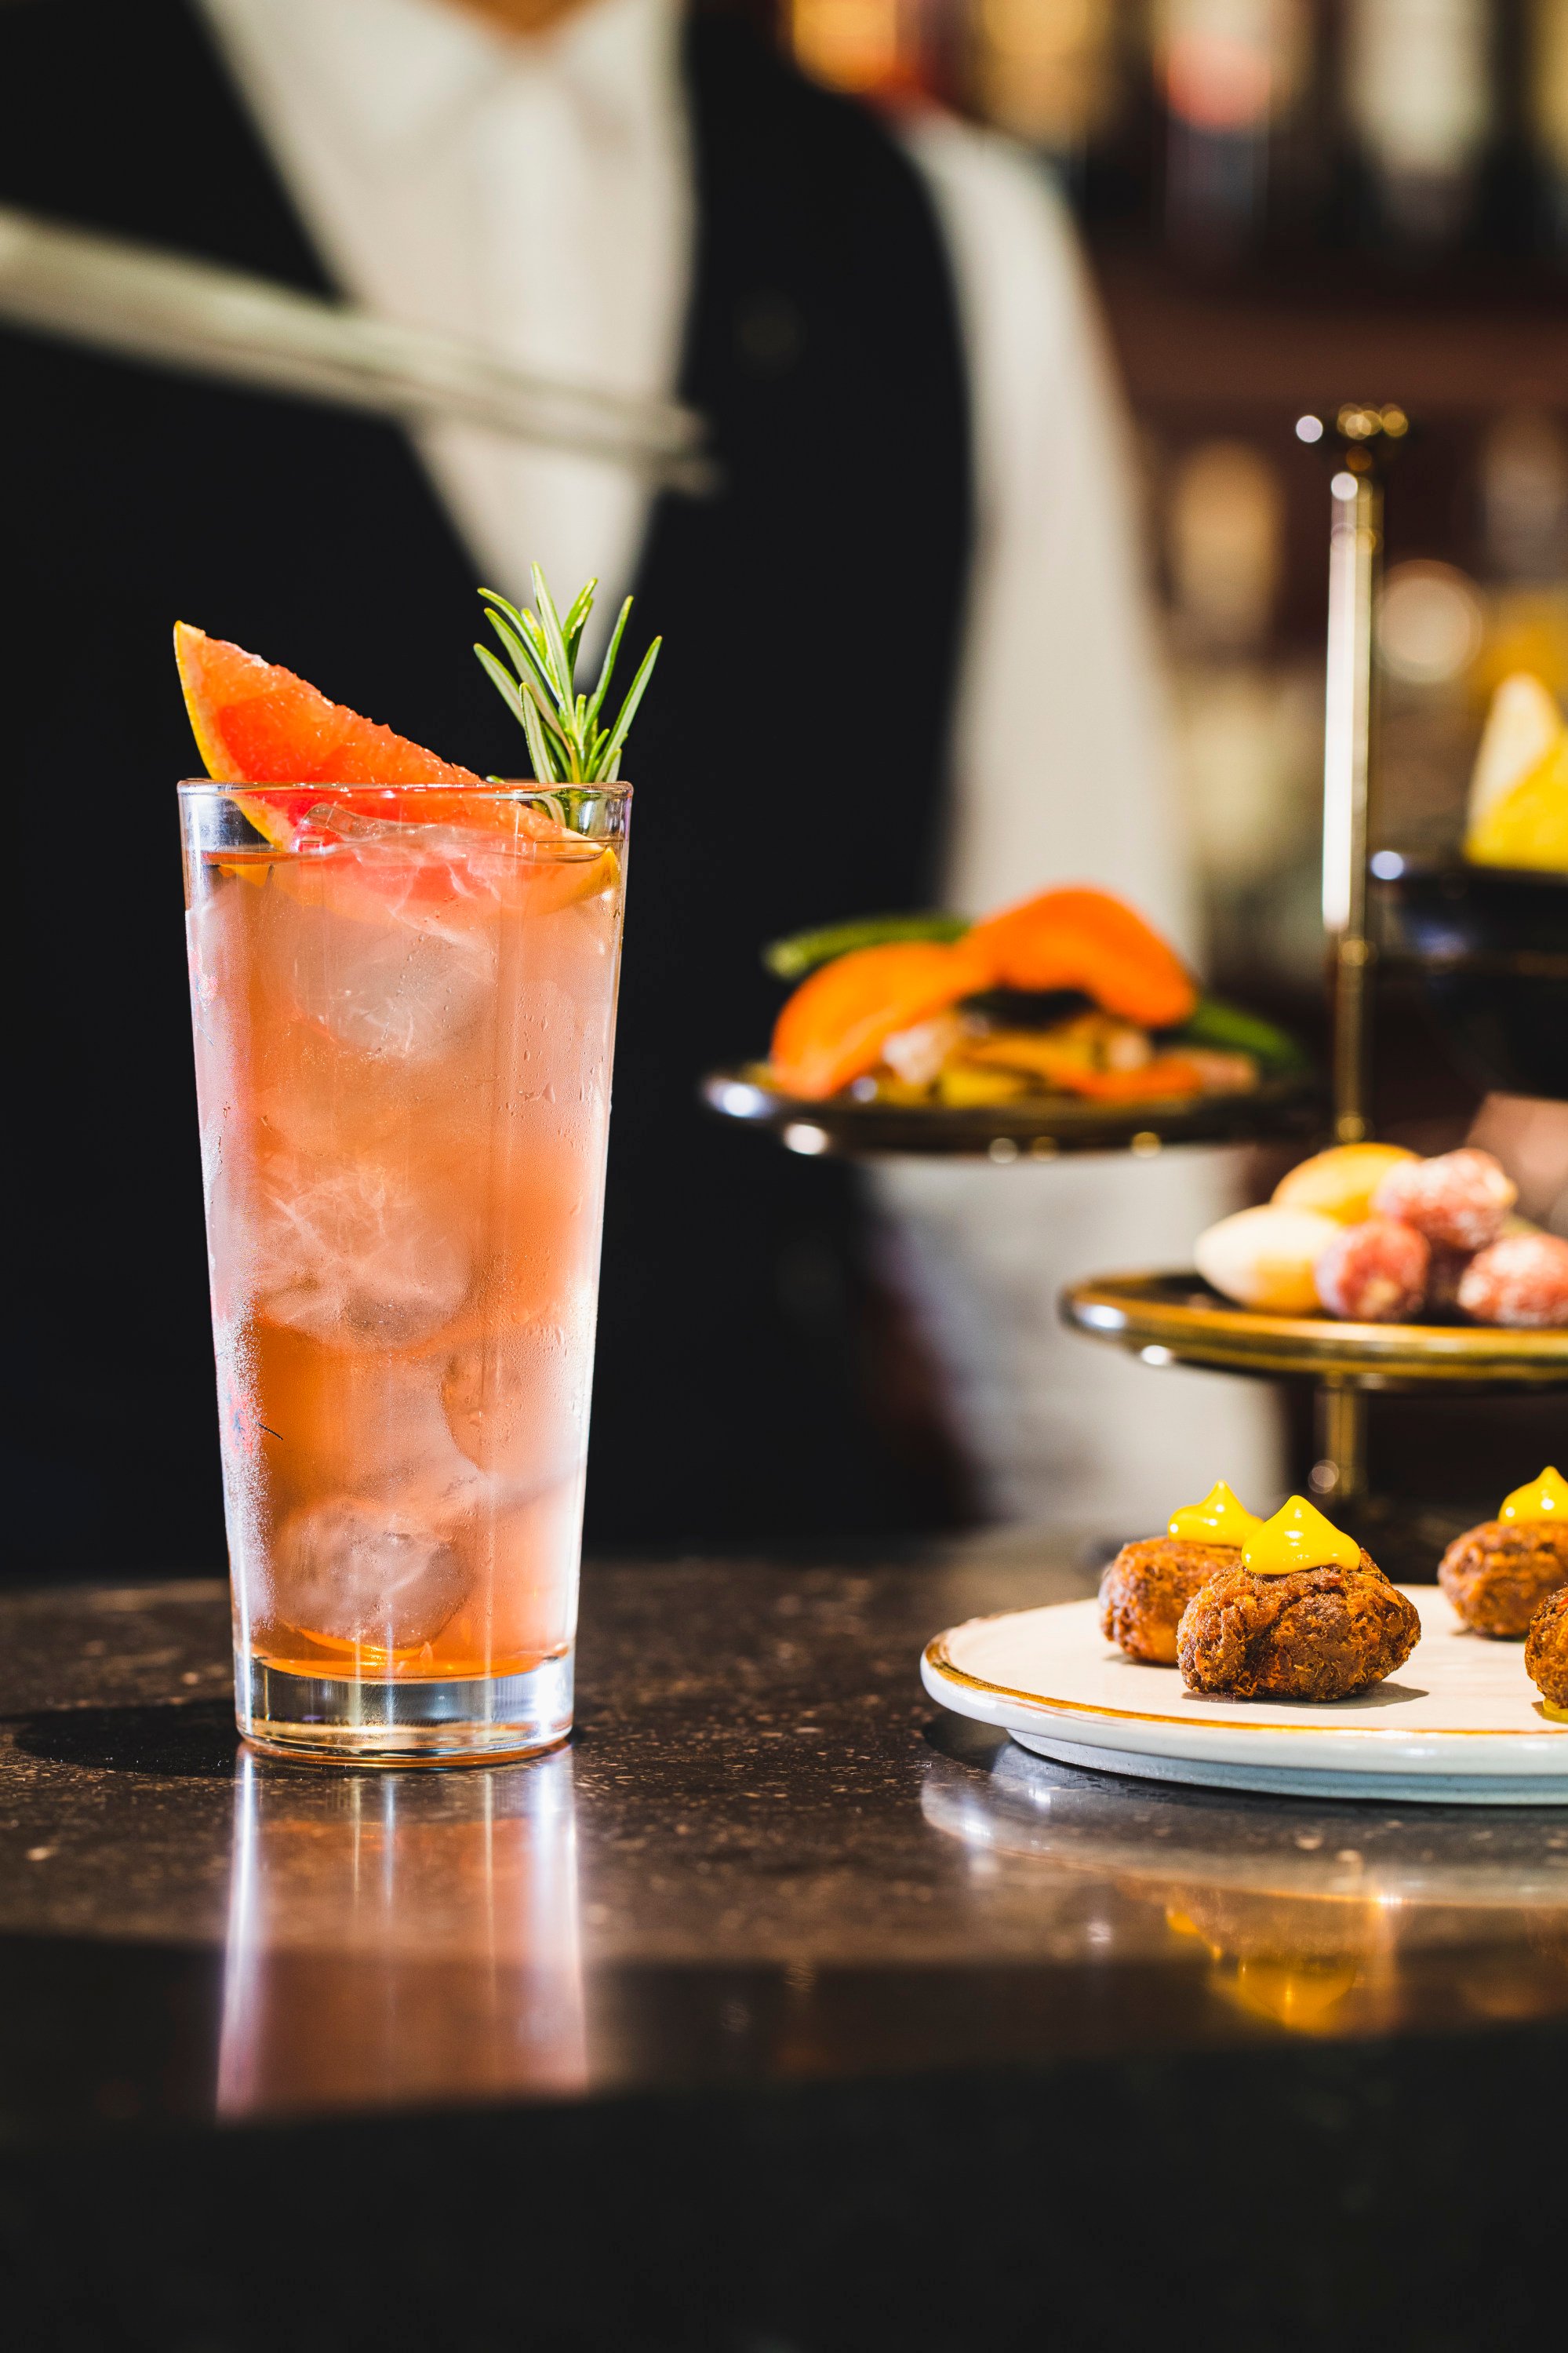 What Is an Aperitif? How to Enjoy This Time-Honored Drink Tradition